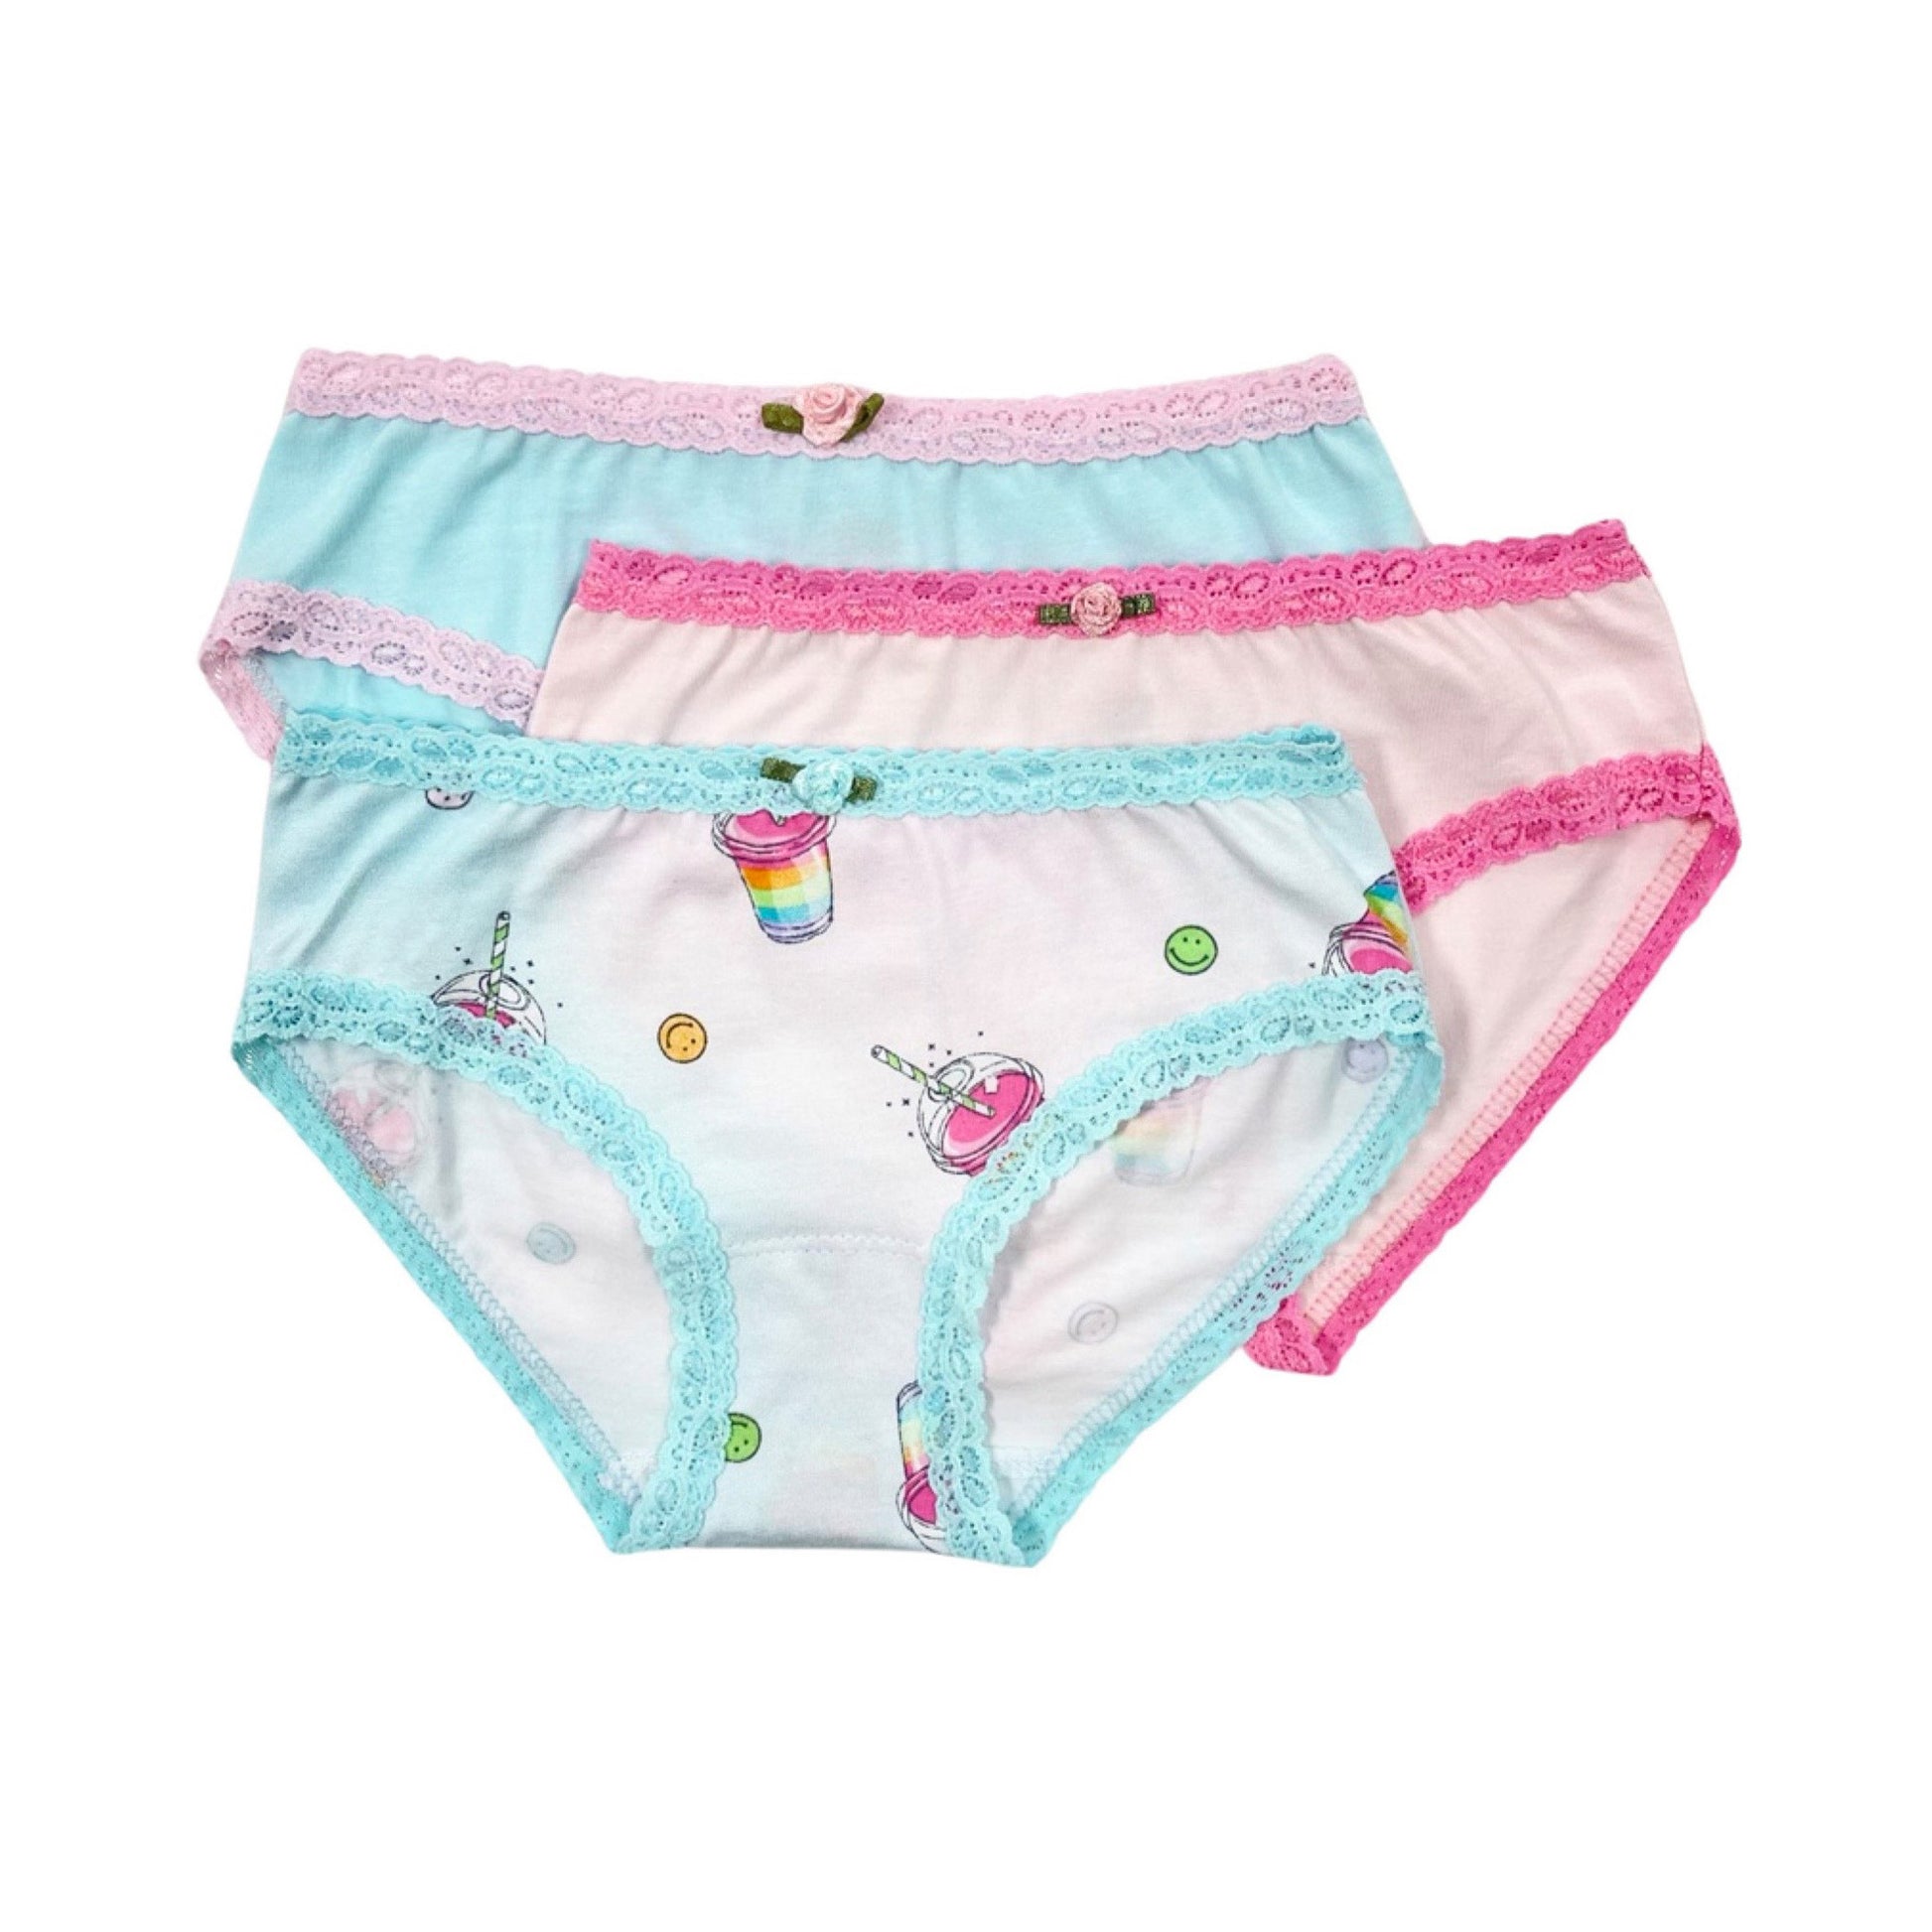 Panty for girls with neurodermatitis - grey - pack of two, 34,00 €